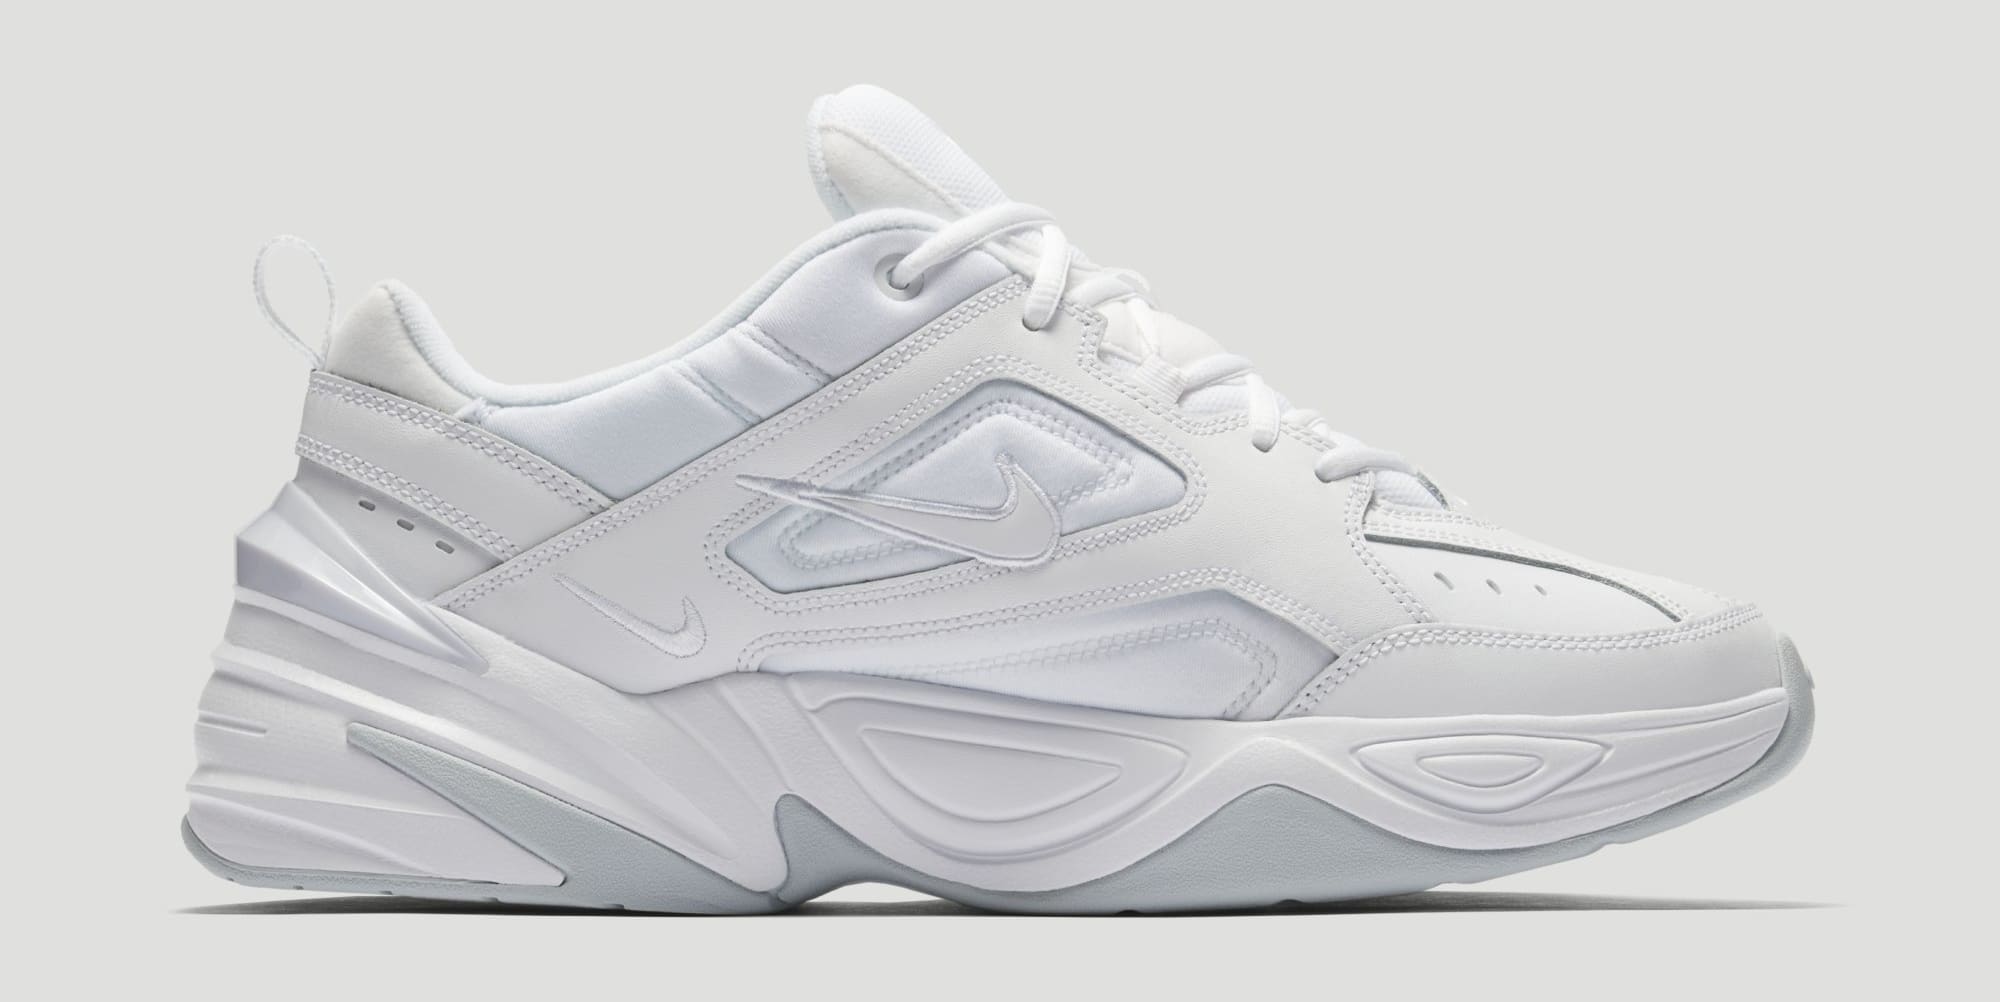 Is This the Most Dad-Friendly Pair of Nike M2K Teknos?